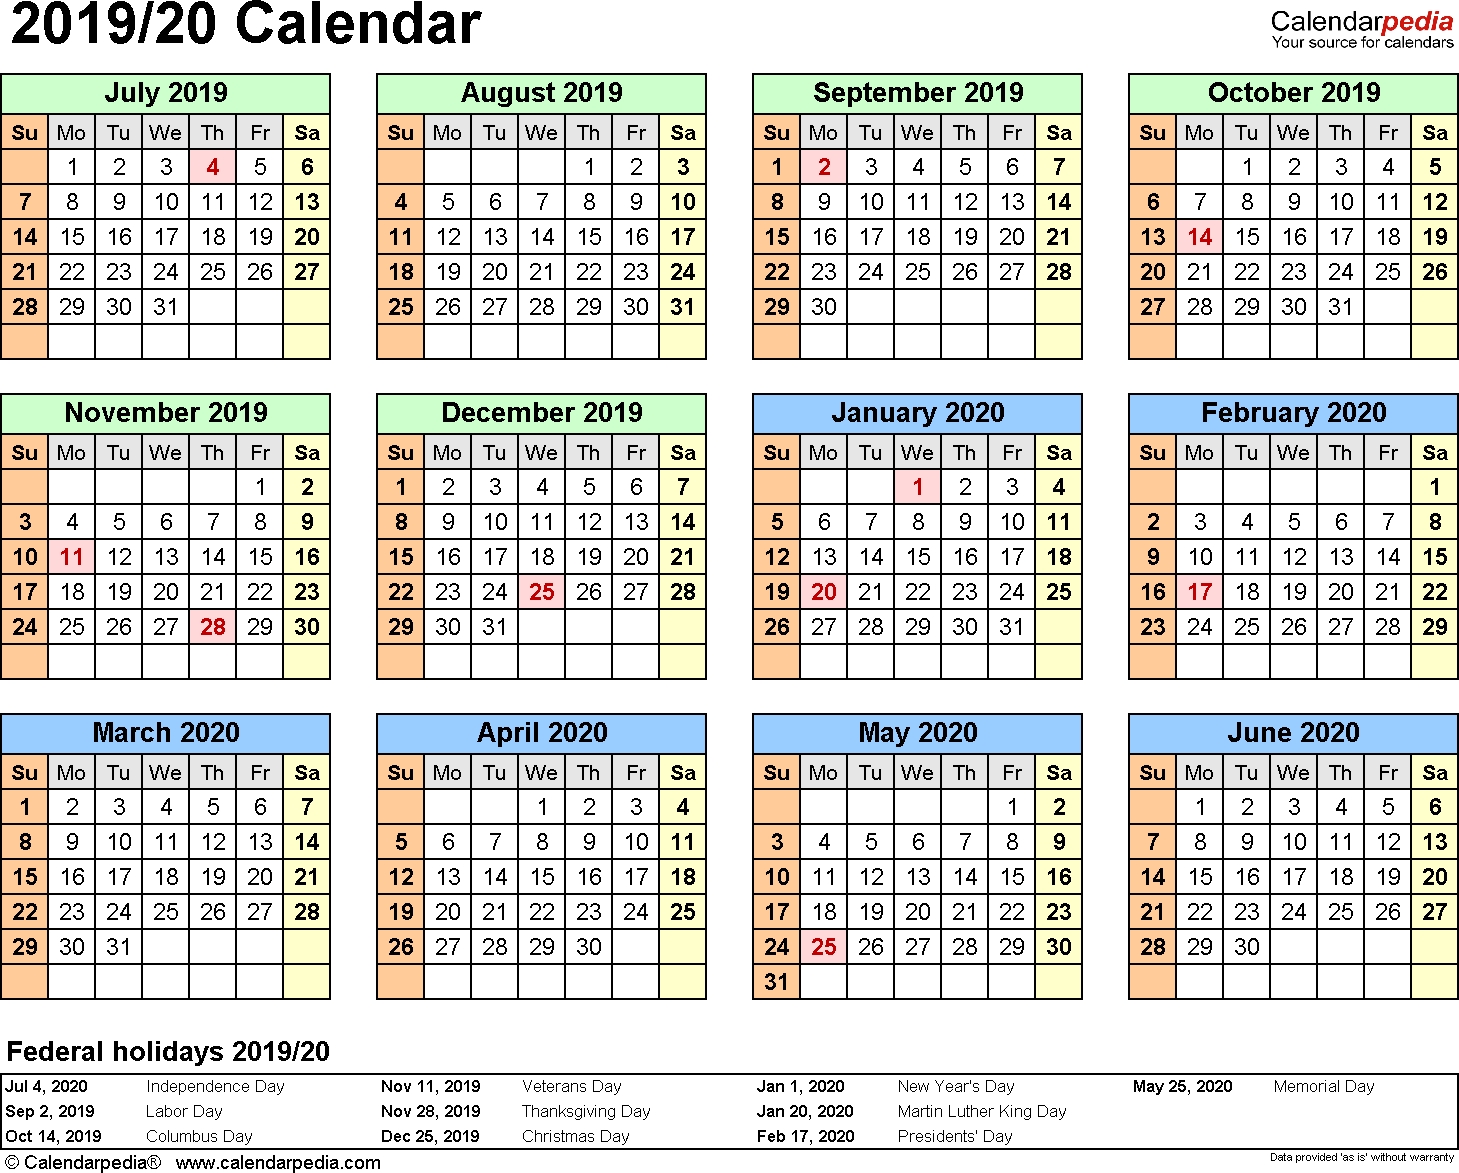 Split Year Calendar 2019/20 (July To June) - Word Templates with Calander Single Page Printable 2019 2020